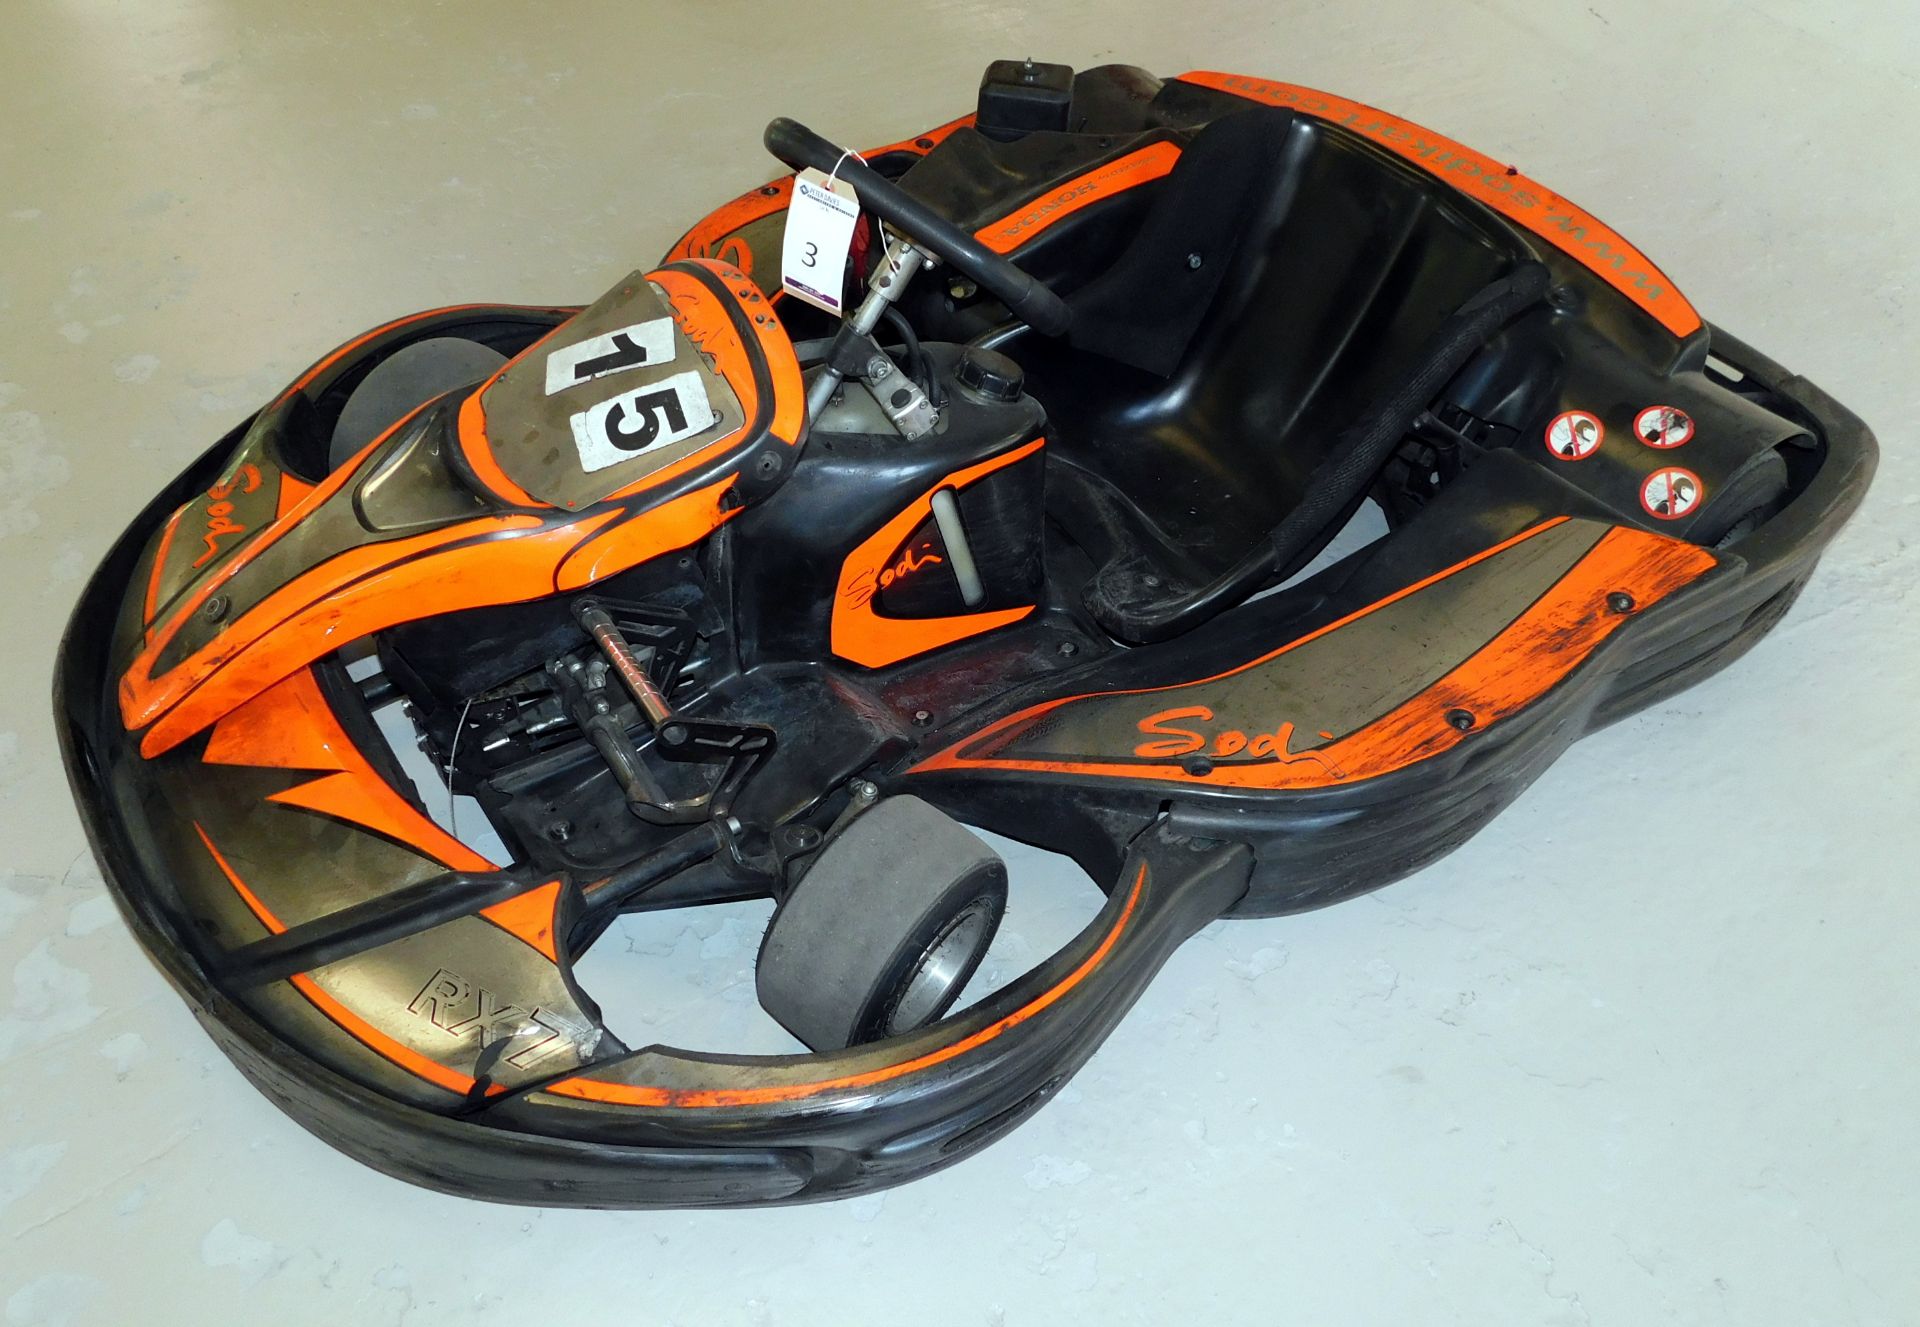 Sodi RX7 Petrol Powered Go-Kart with Honda GX200 Engine (located in Bredbury, collection Friday 20th - Image 2 of 5